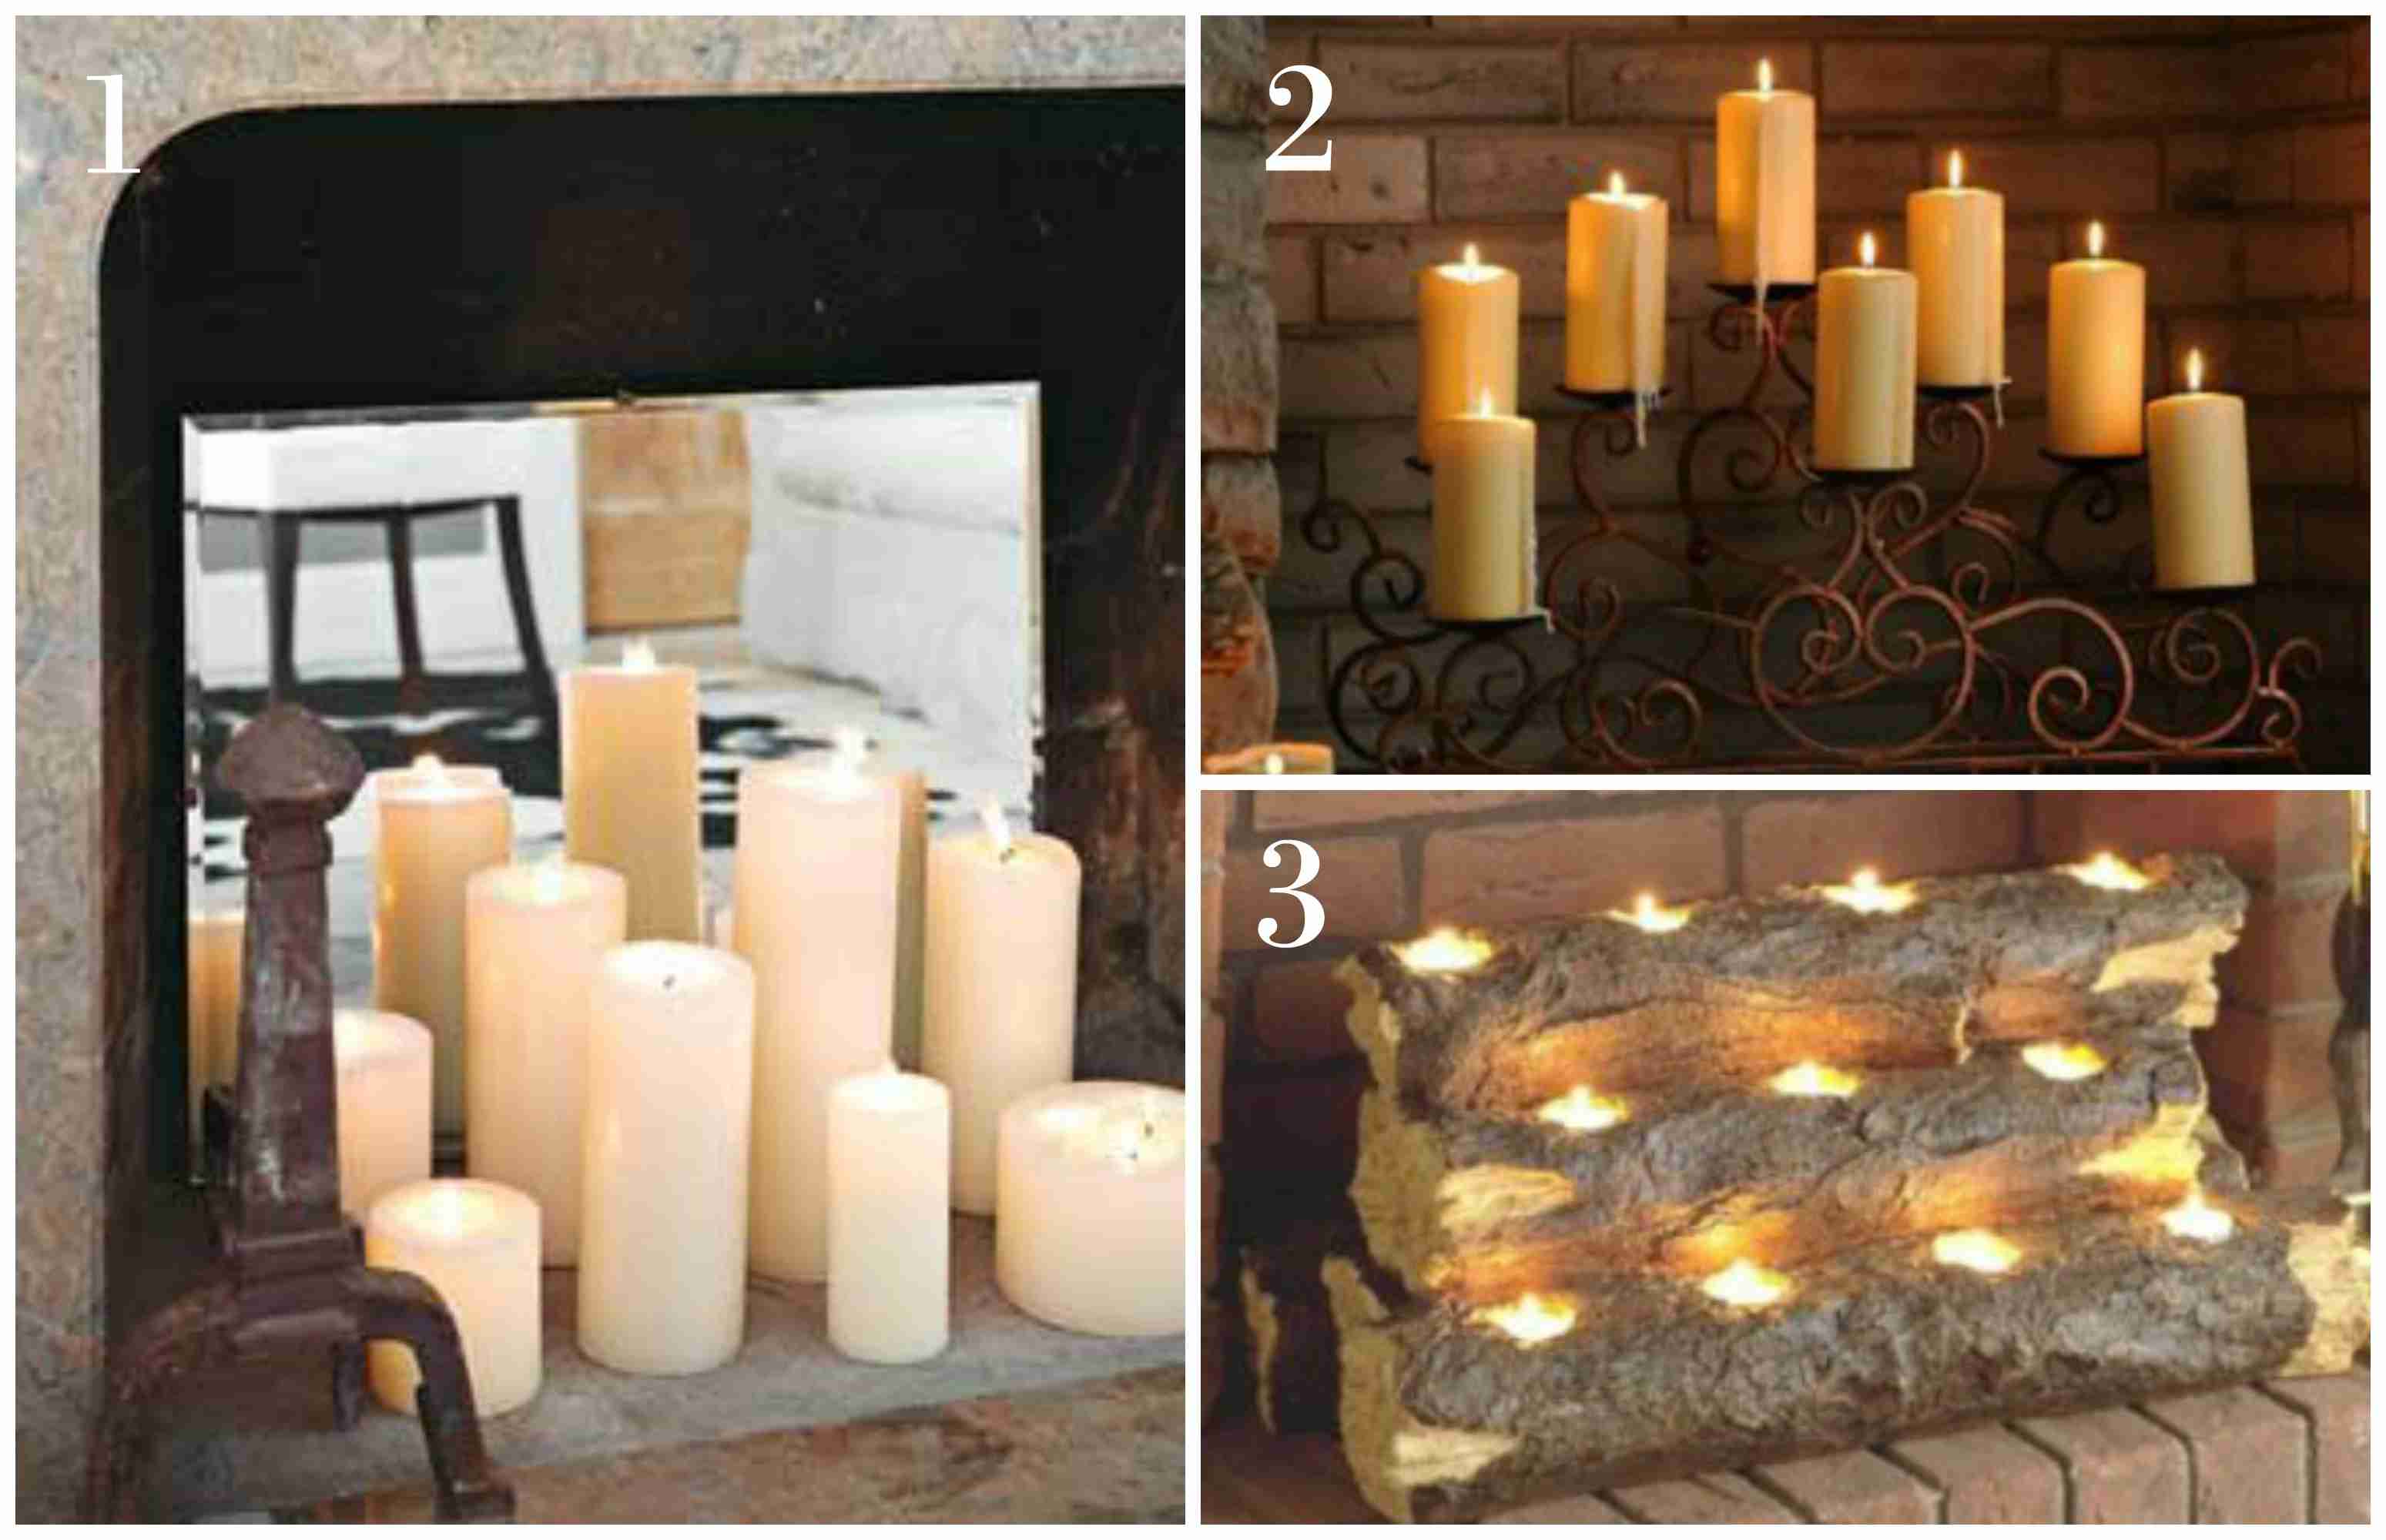 Fireplace Mesh Screen Curtain Best Of Creative Ways to Diy Fireplace Screens and Accessories